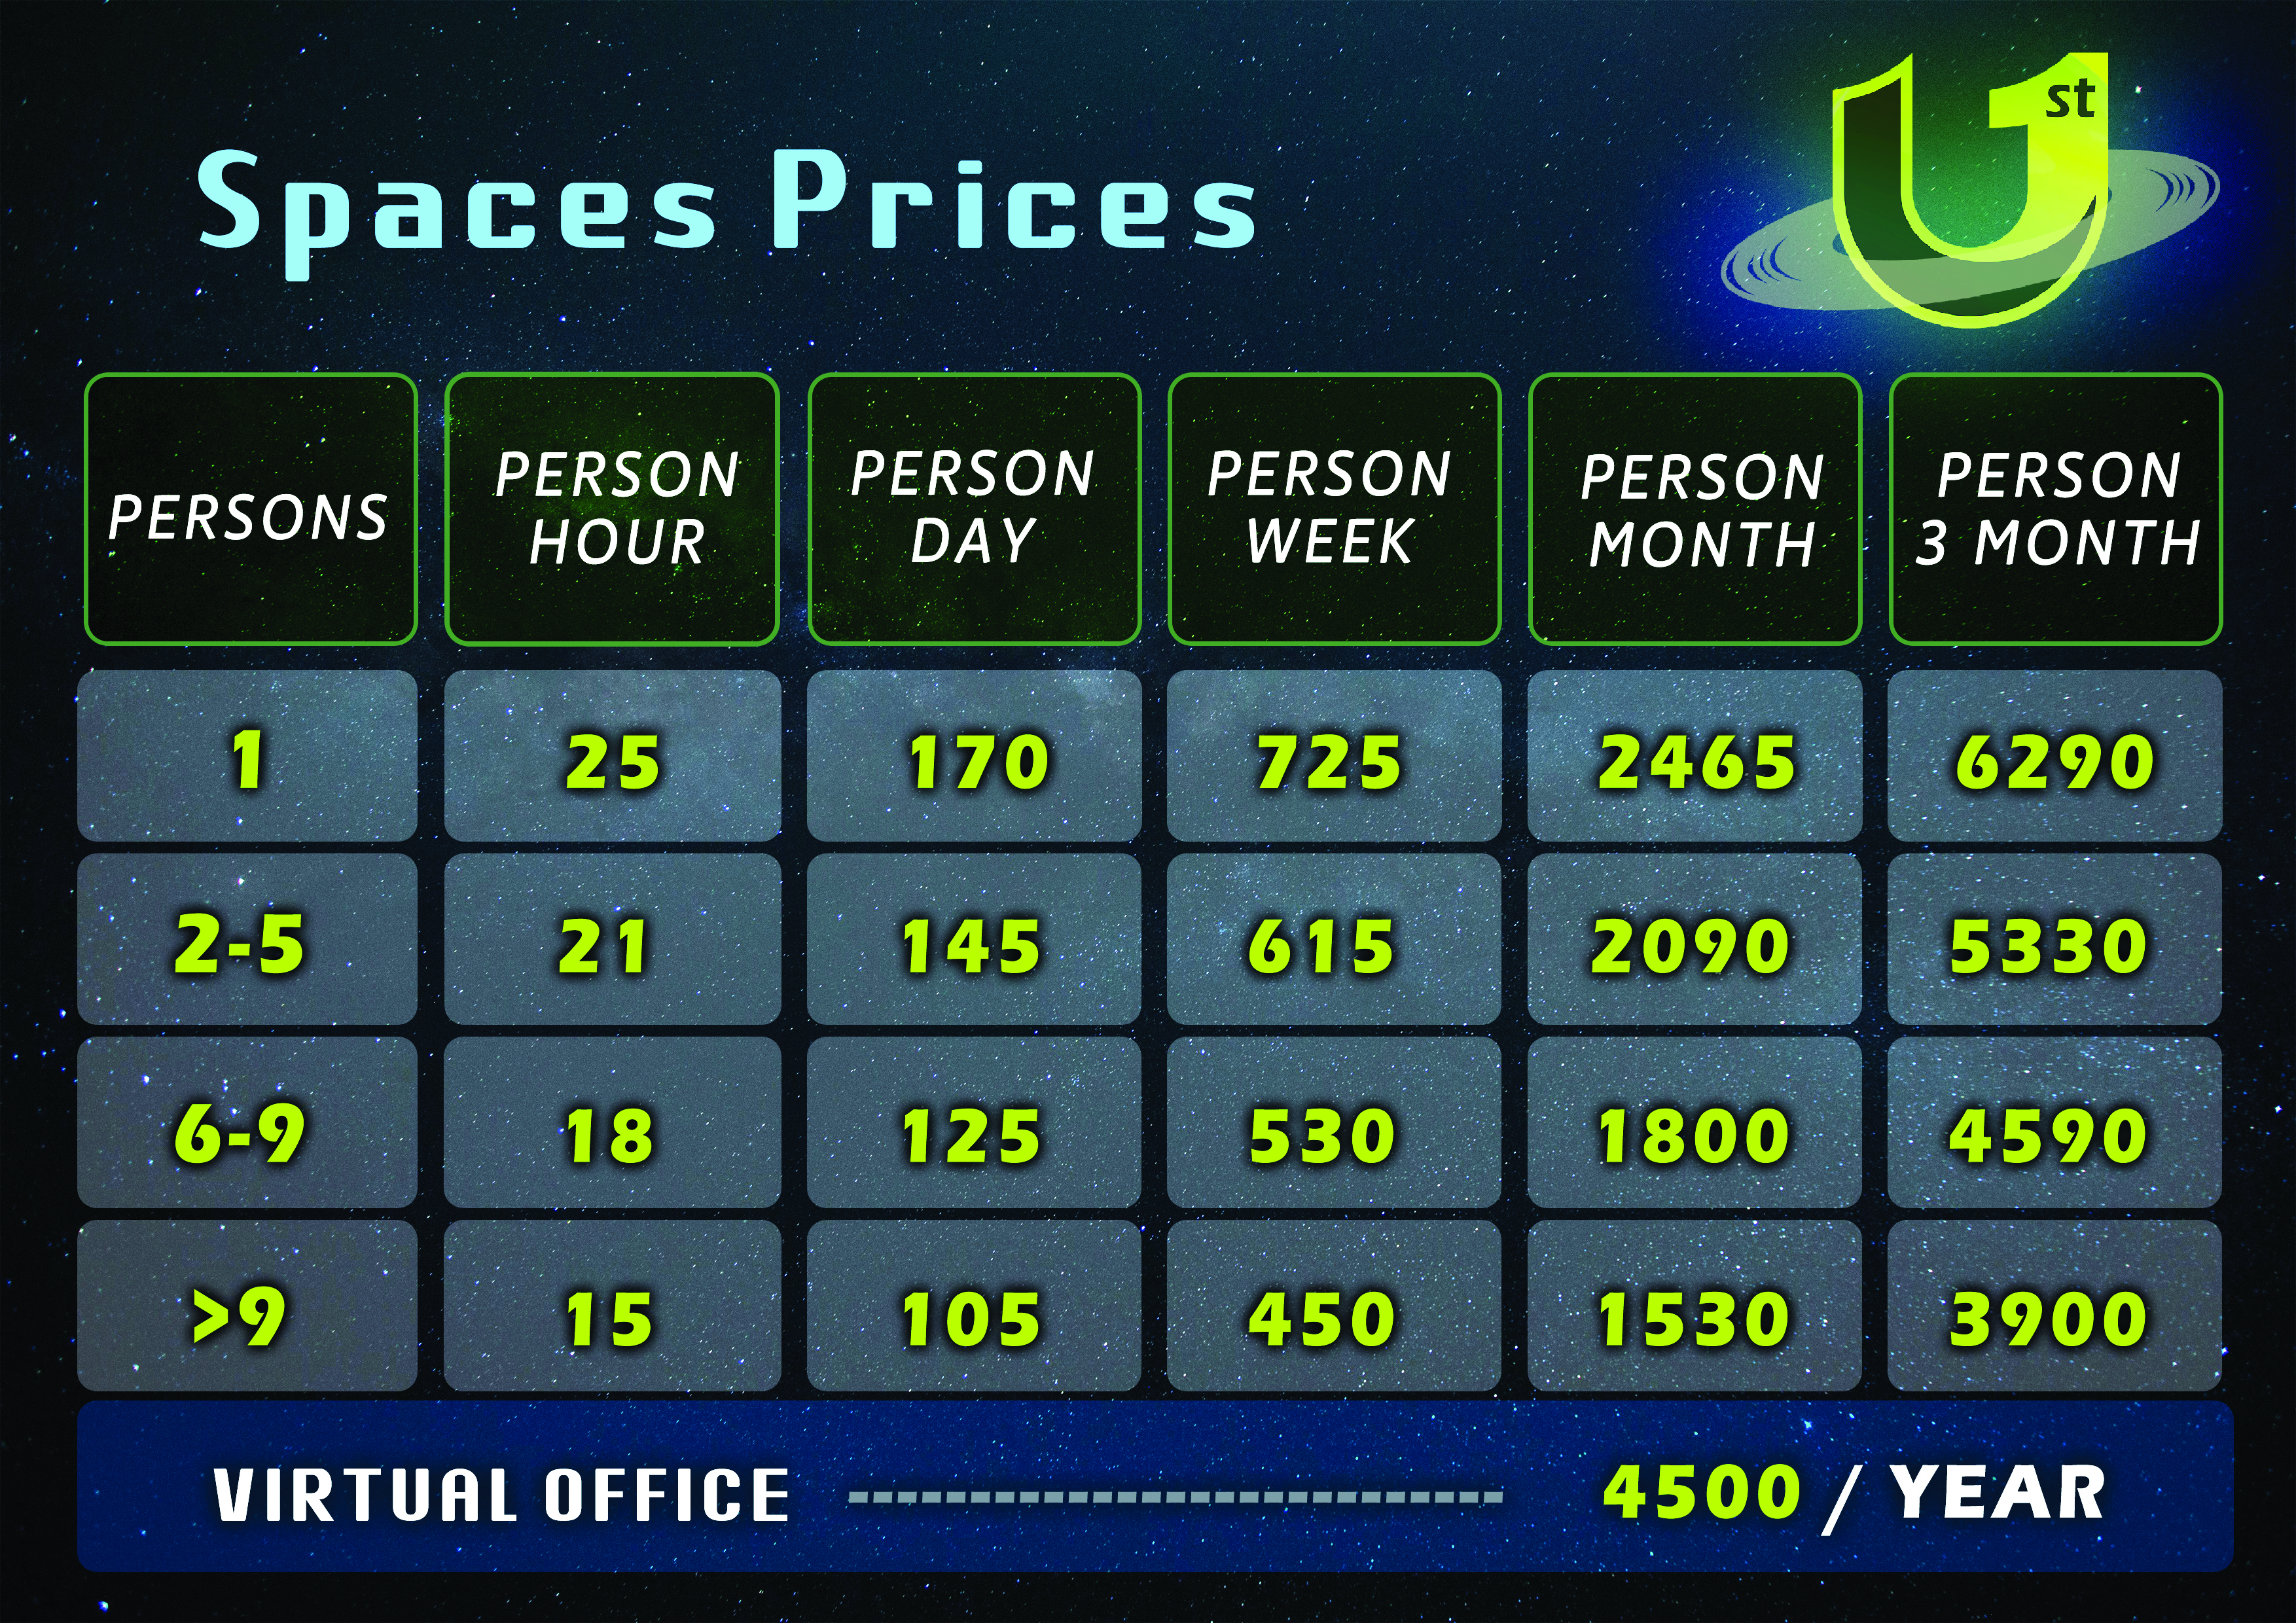 Shared space prices